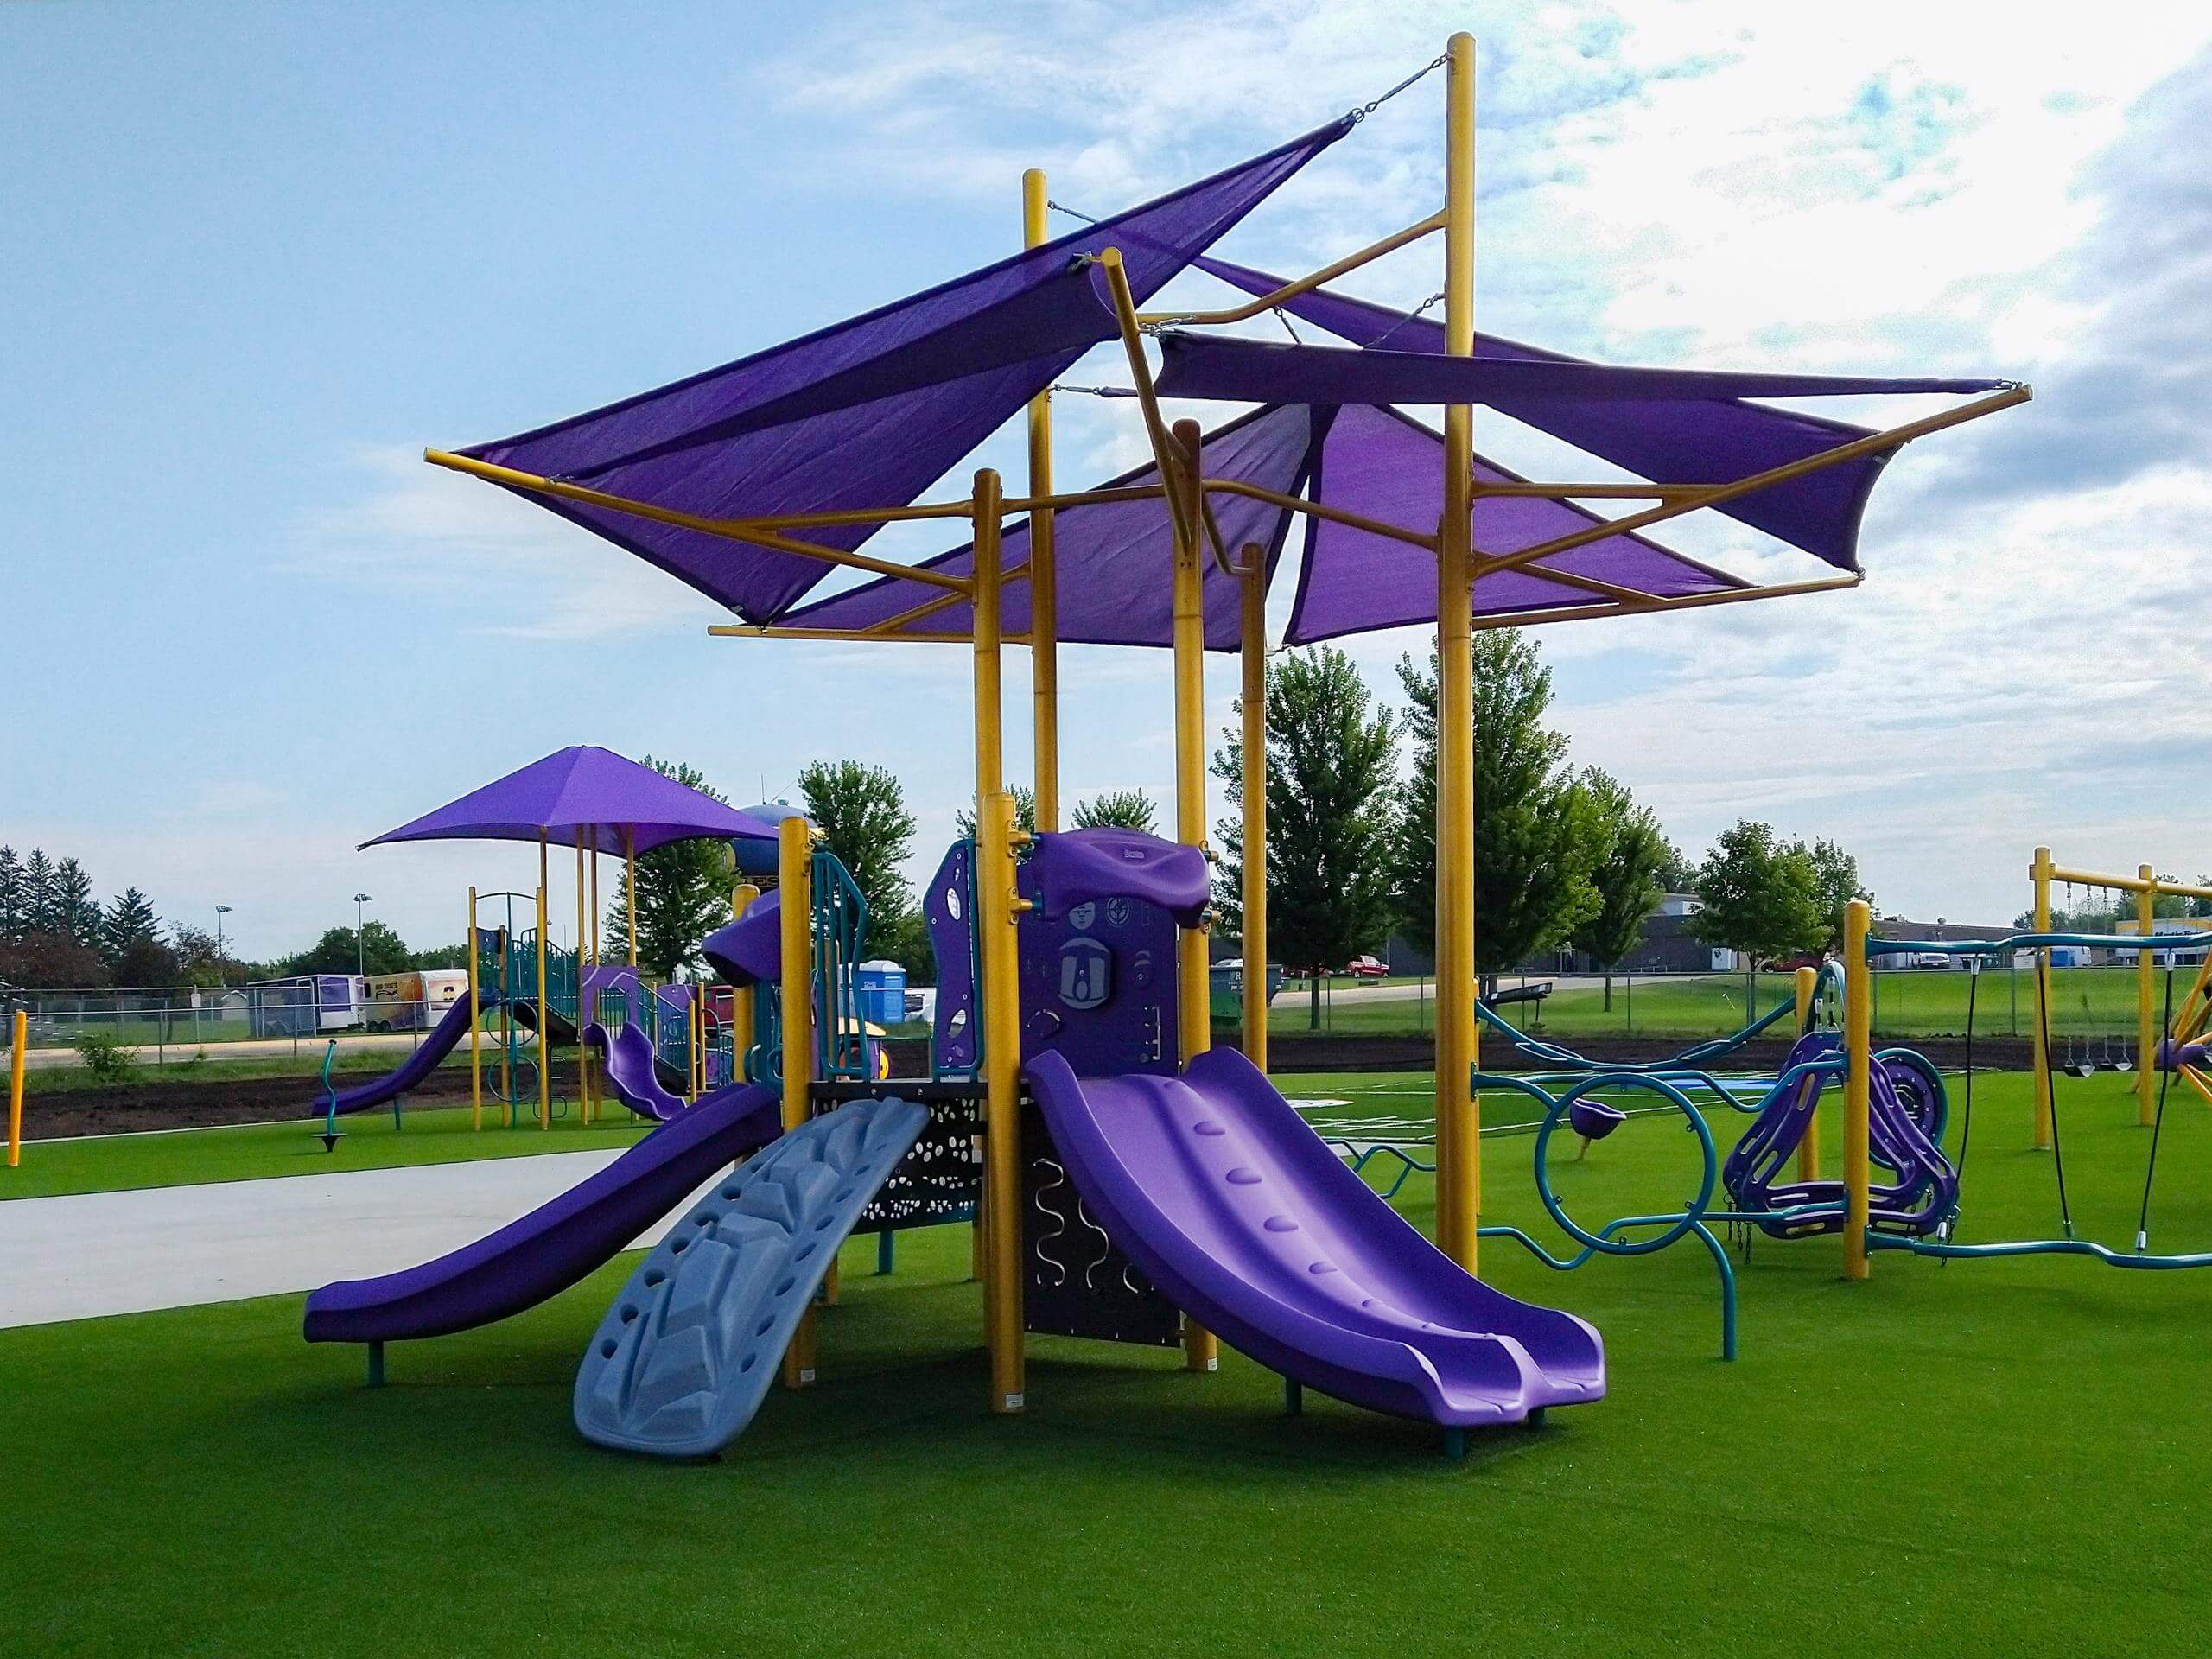 Playground with purple slides and sunshades, and vibrant play panels on green turf.